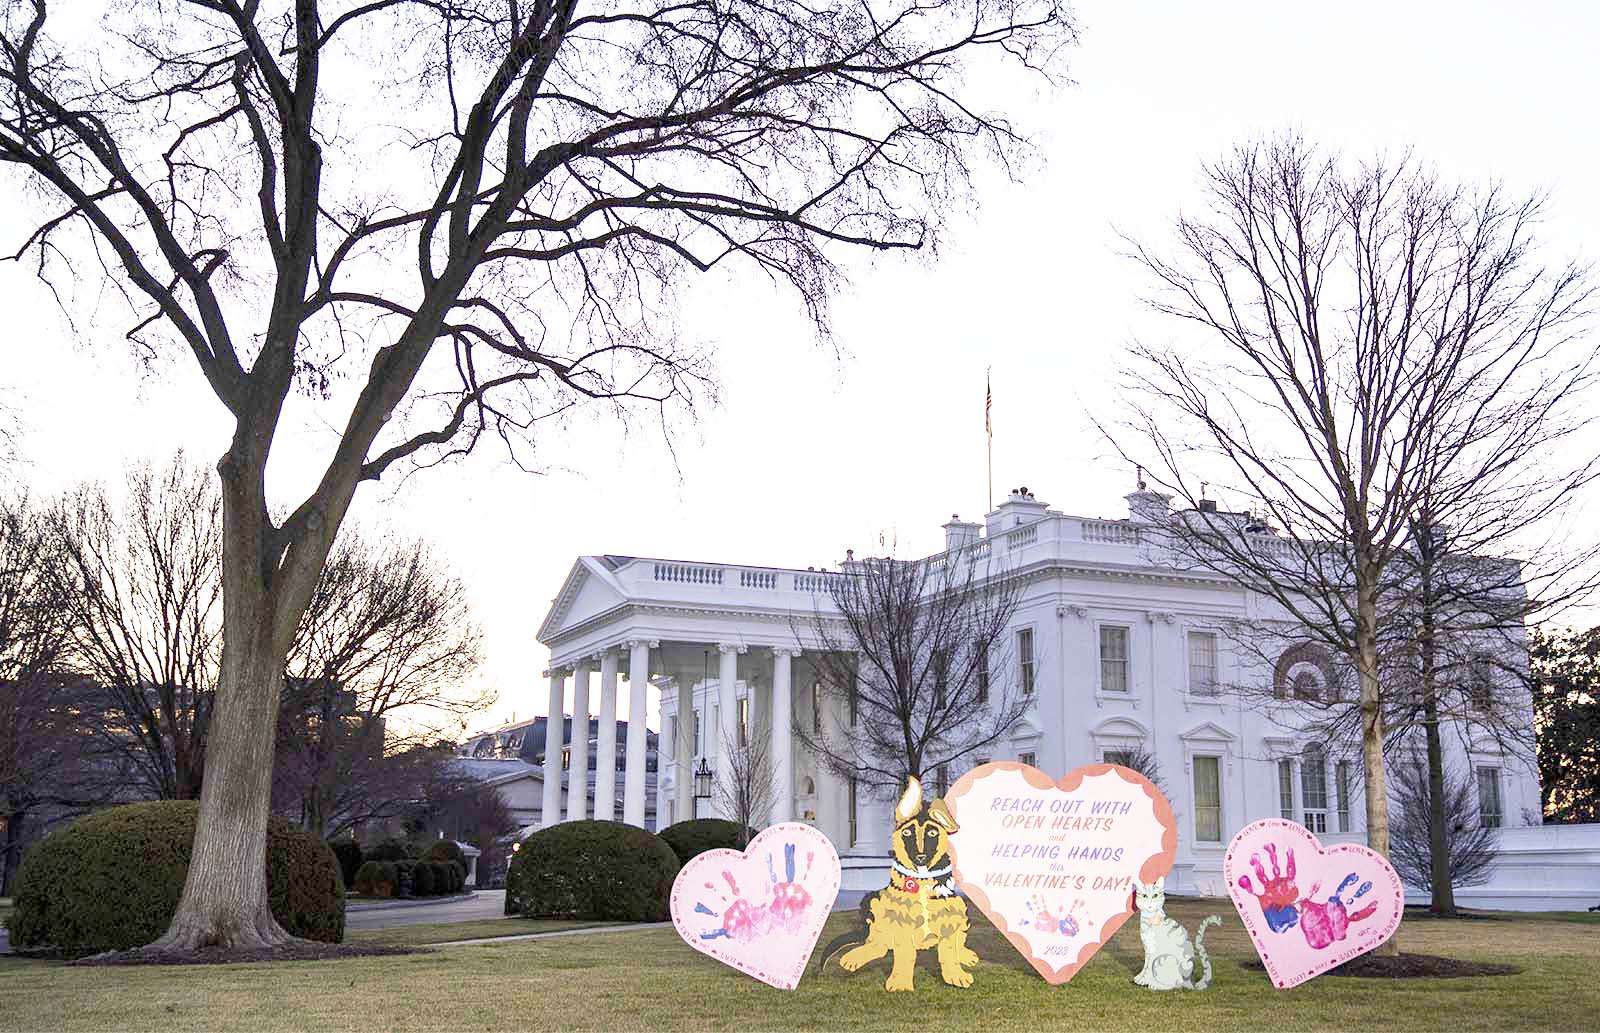 WASHINGTON, DC - FEBRUARY 14: Valentines Day decorations stand on the North Lawn of the White House February 14, 2023 in Washington, DC. Cut-outs of the Biden family dog Commander and cat Willow are also included in the display. (Photo by Drew Angerer/Getty Images)